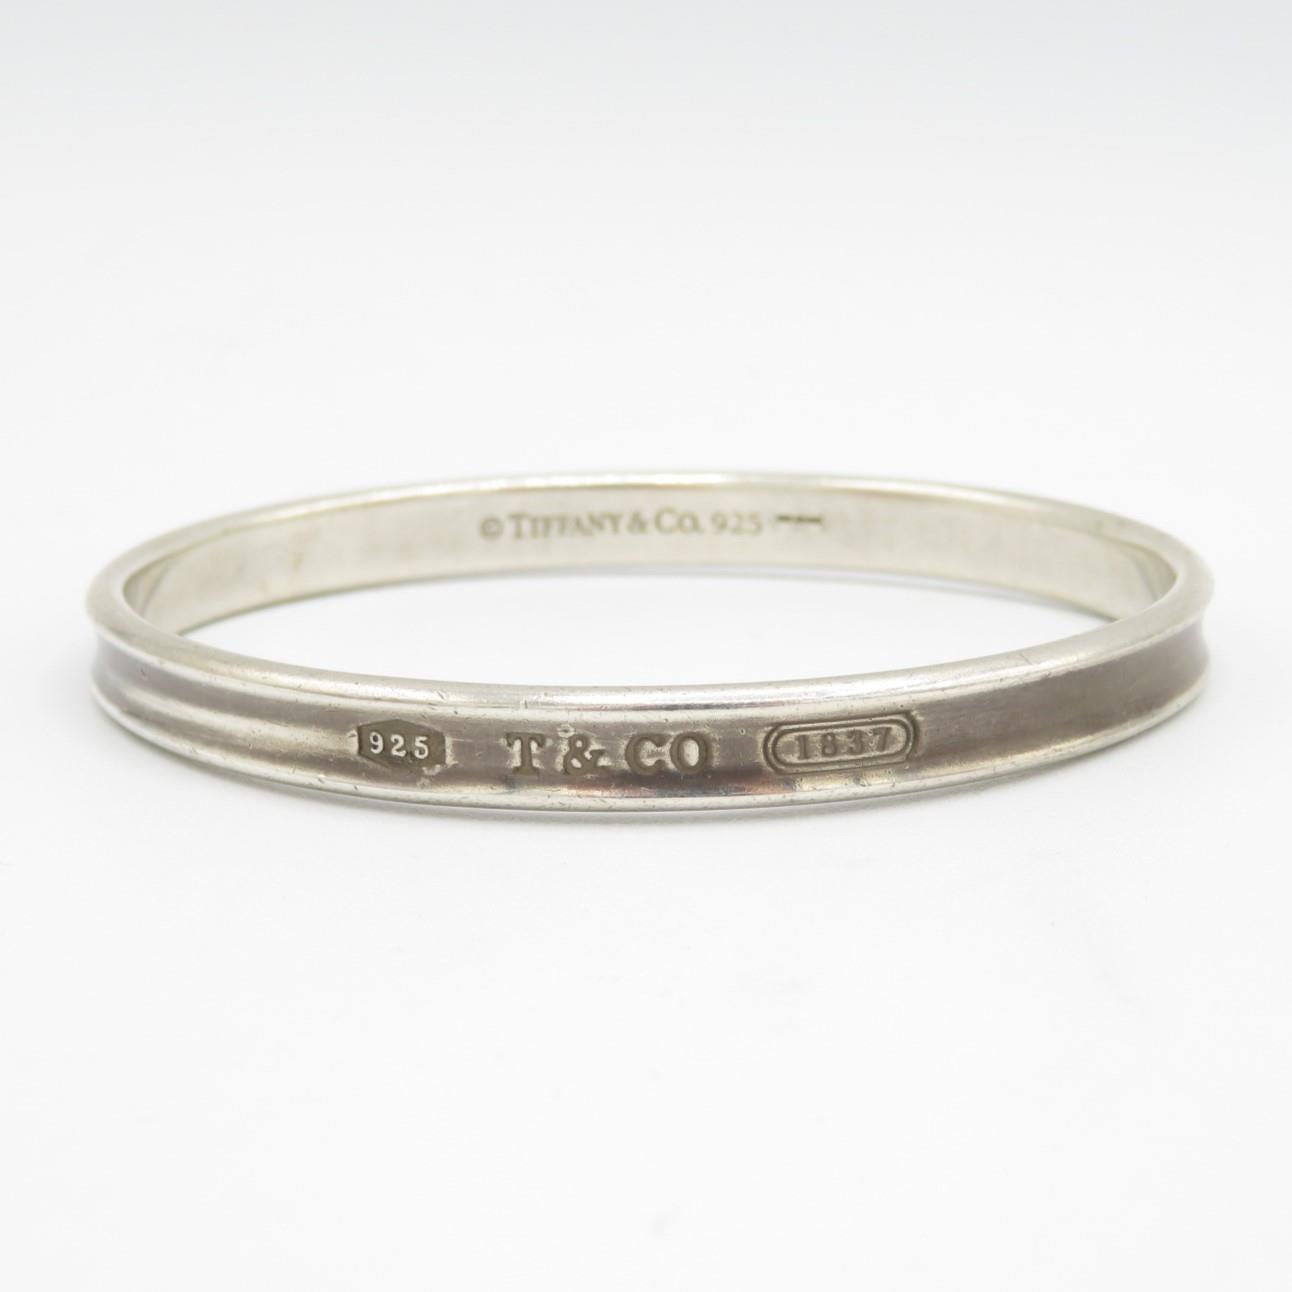 Silver bangle by designer Tiffany & Co (32g) - Image 6 of 12